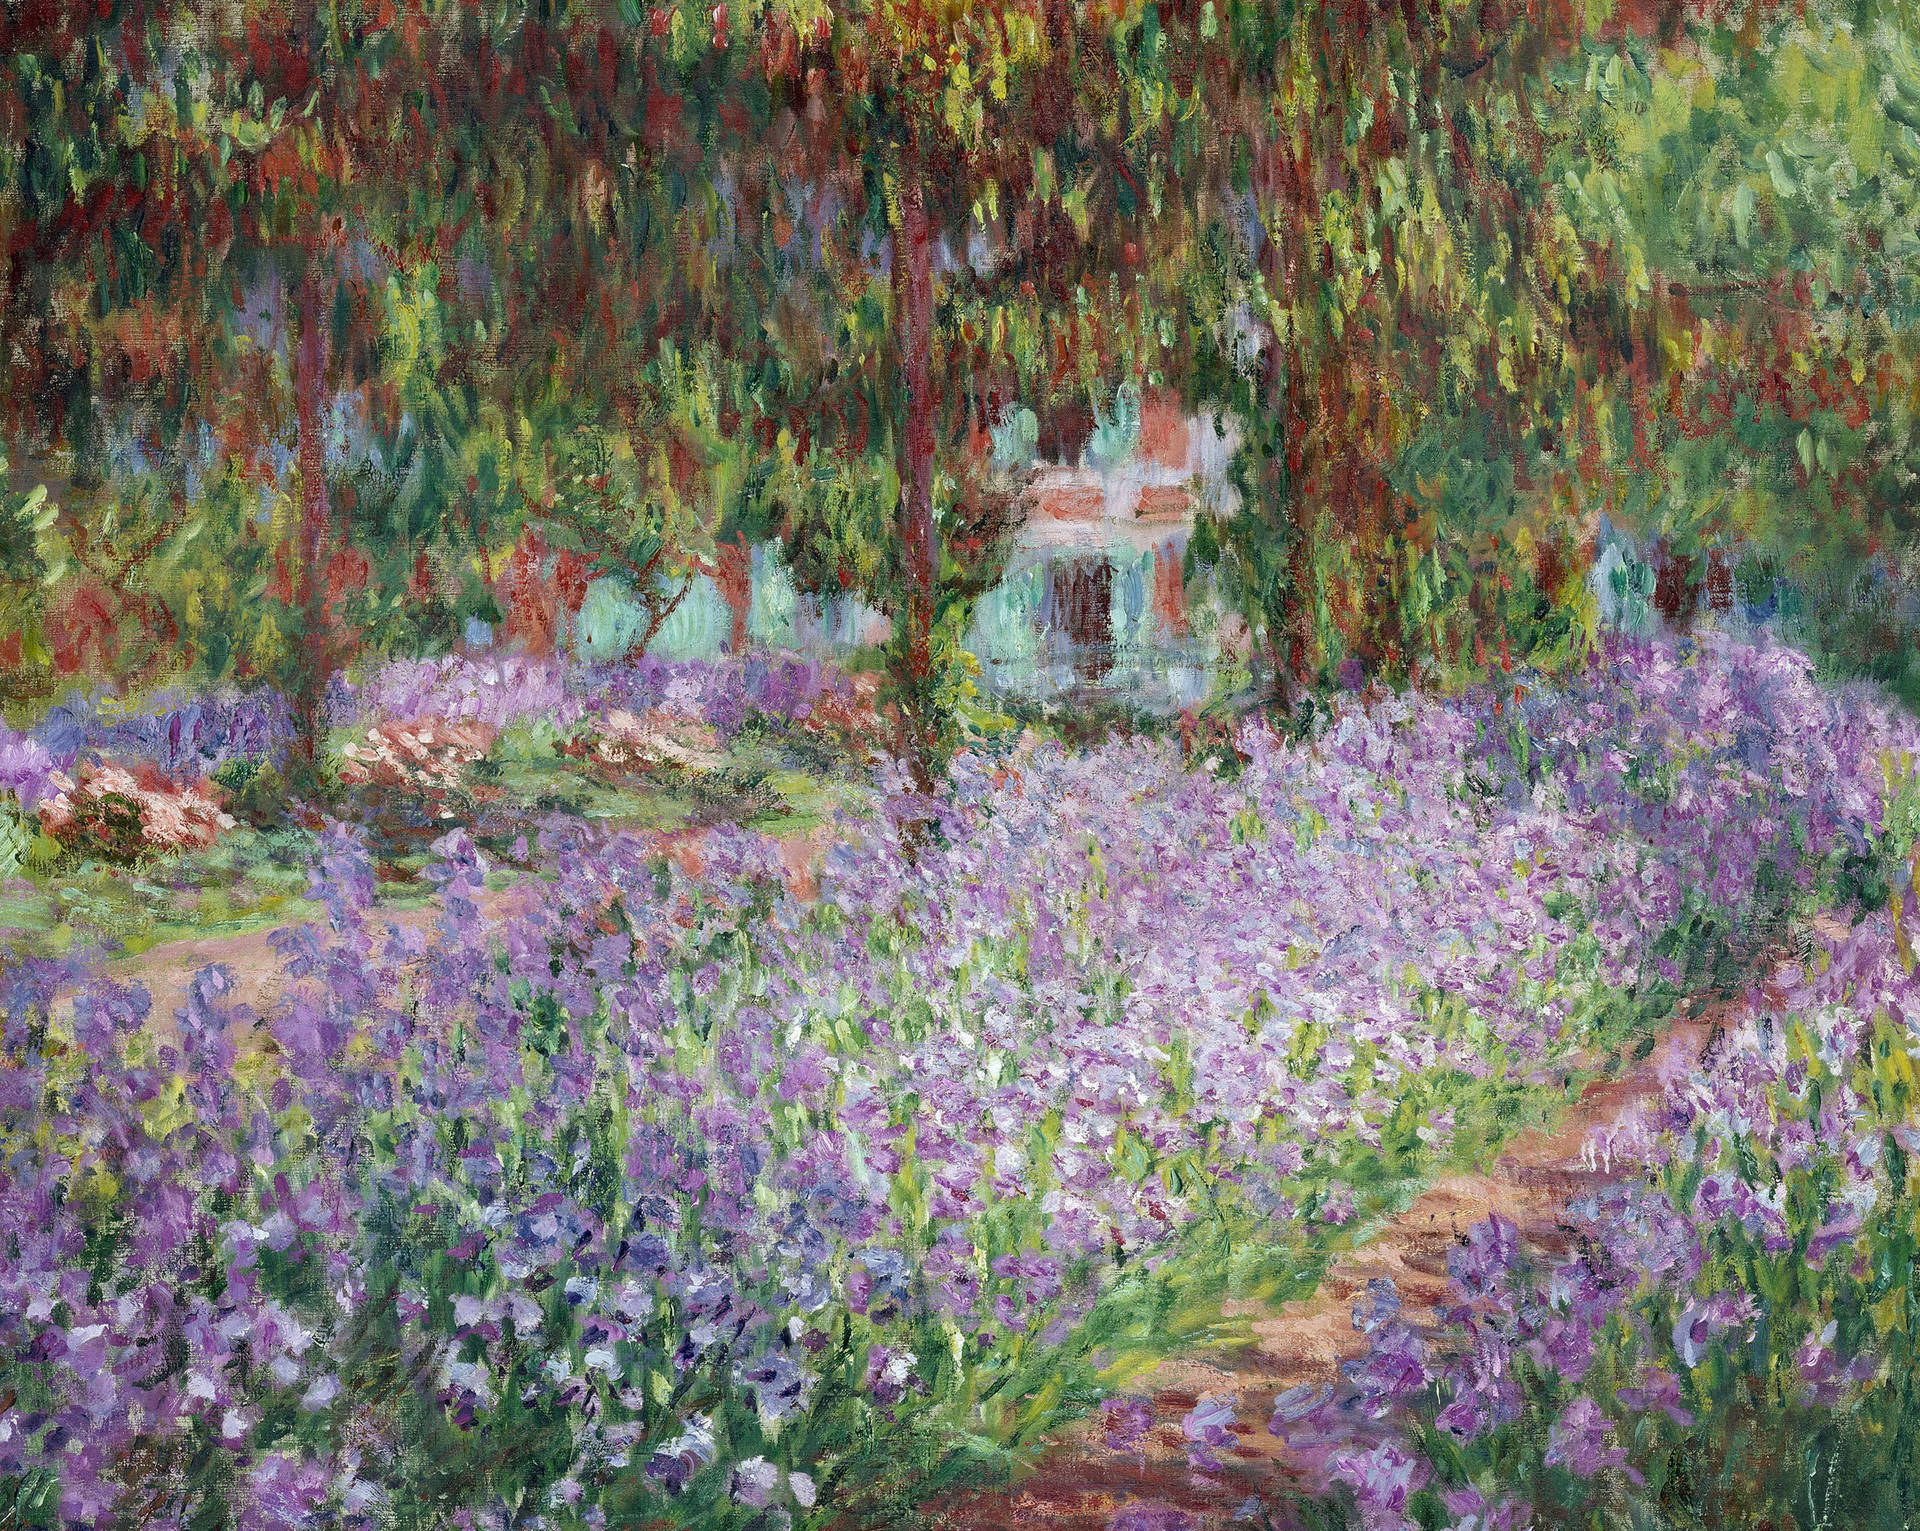 An Aesthetic Depiction Of The Artist's Garden - A Classic Impressionist Art Piece Background